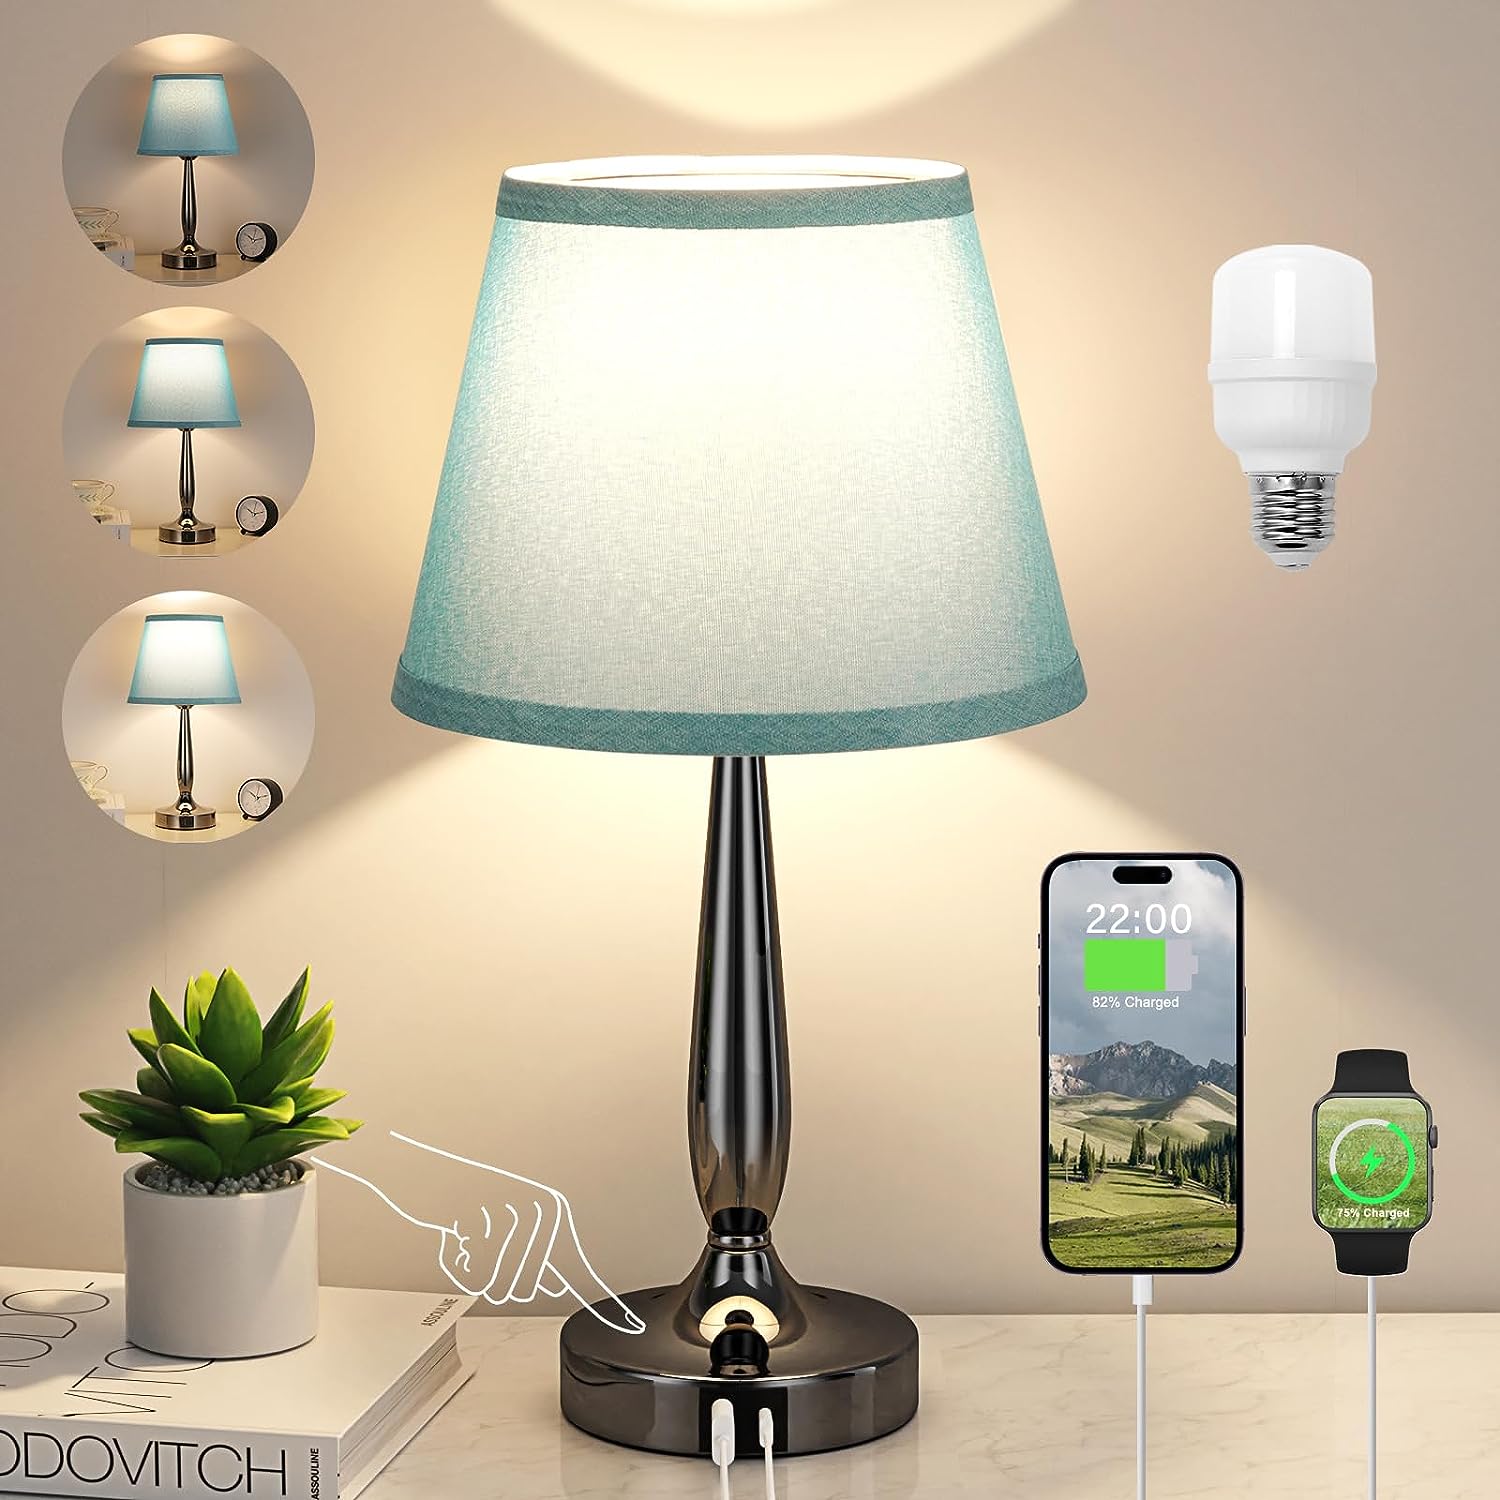 VENETIO Touch Table Lamp with USB Ports for Bedroom, Small Touch Bedside Lamp with USB C Charging Port, 3 Way Dimmable Touch Control Nightstand Lamp for Living Room and Office, LED Bulb Included ➡ B-00006